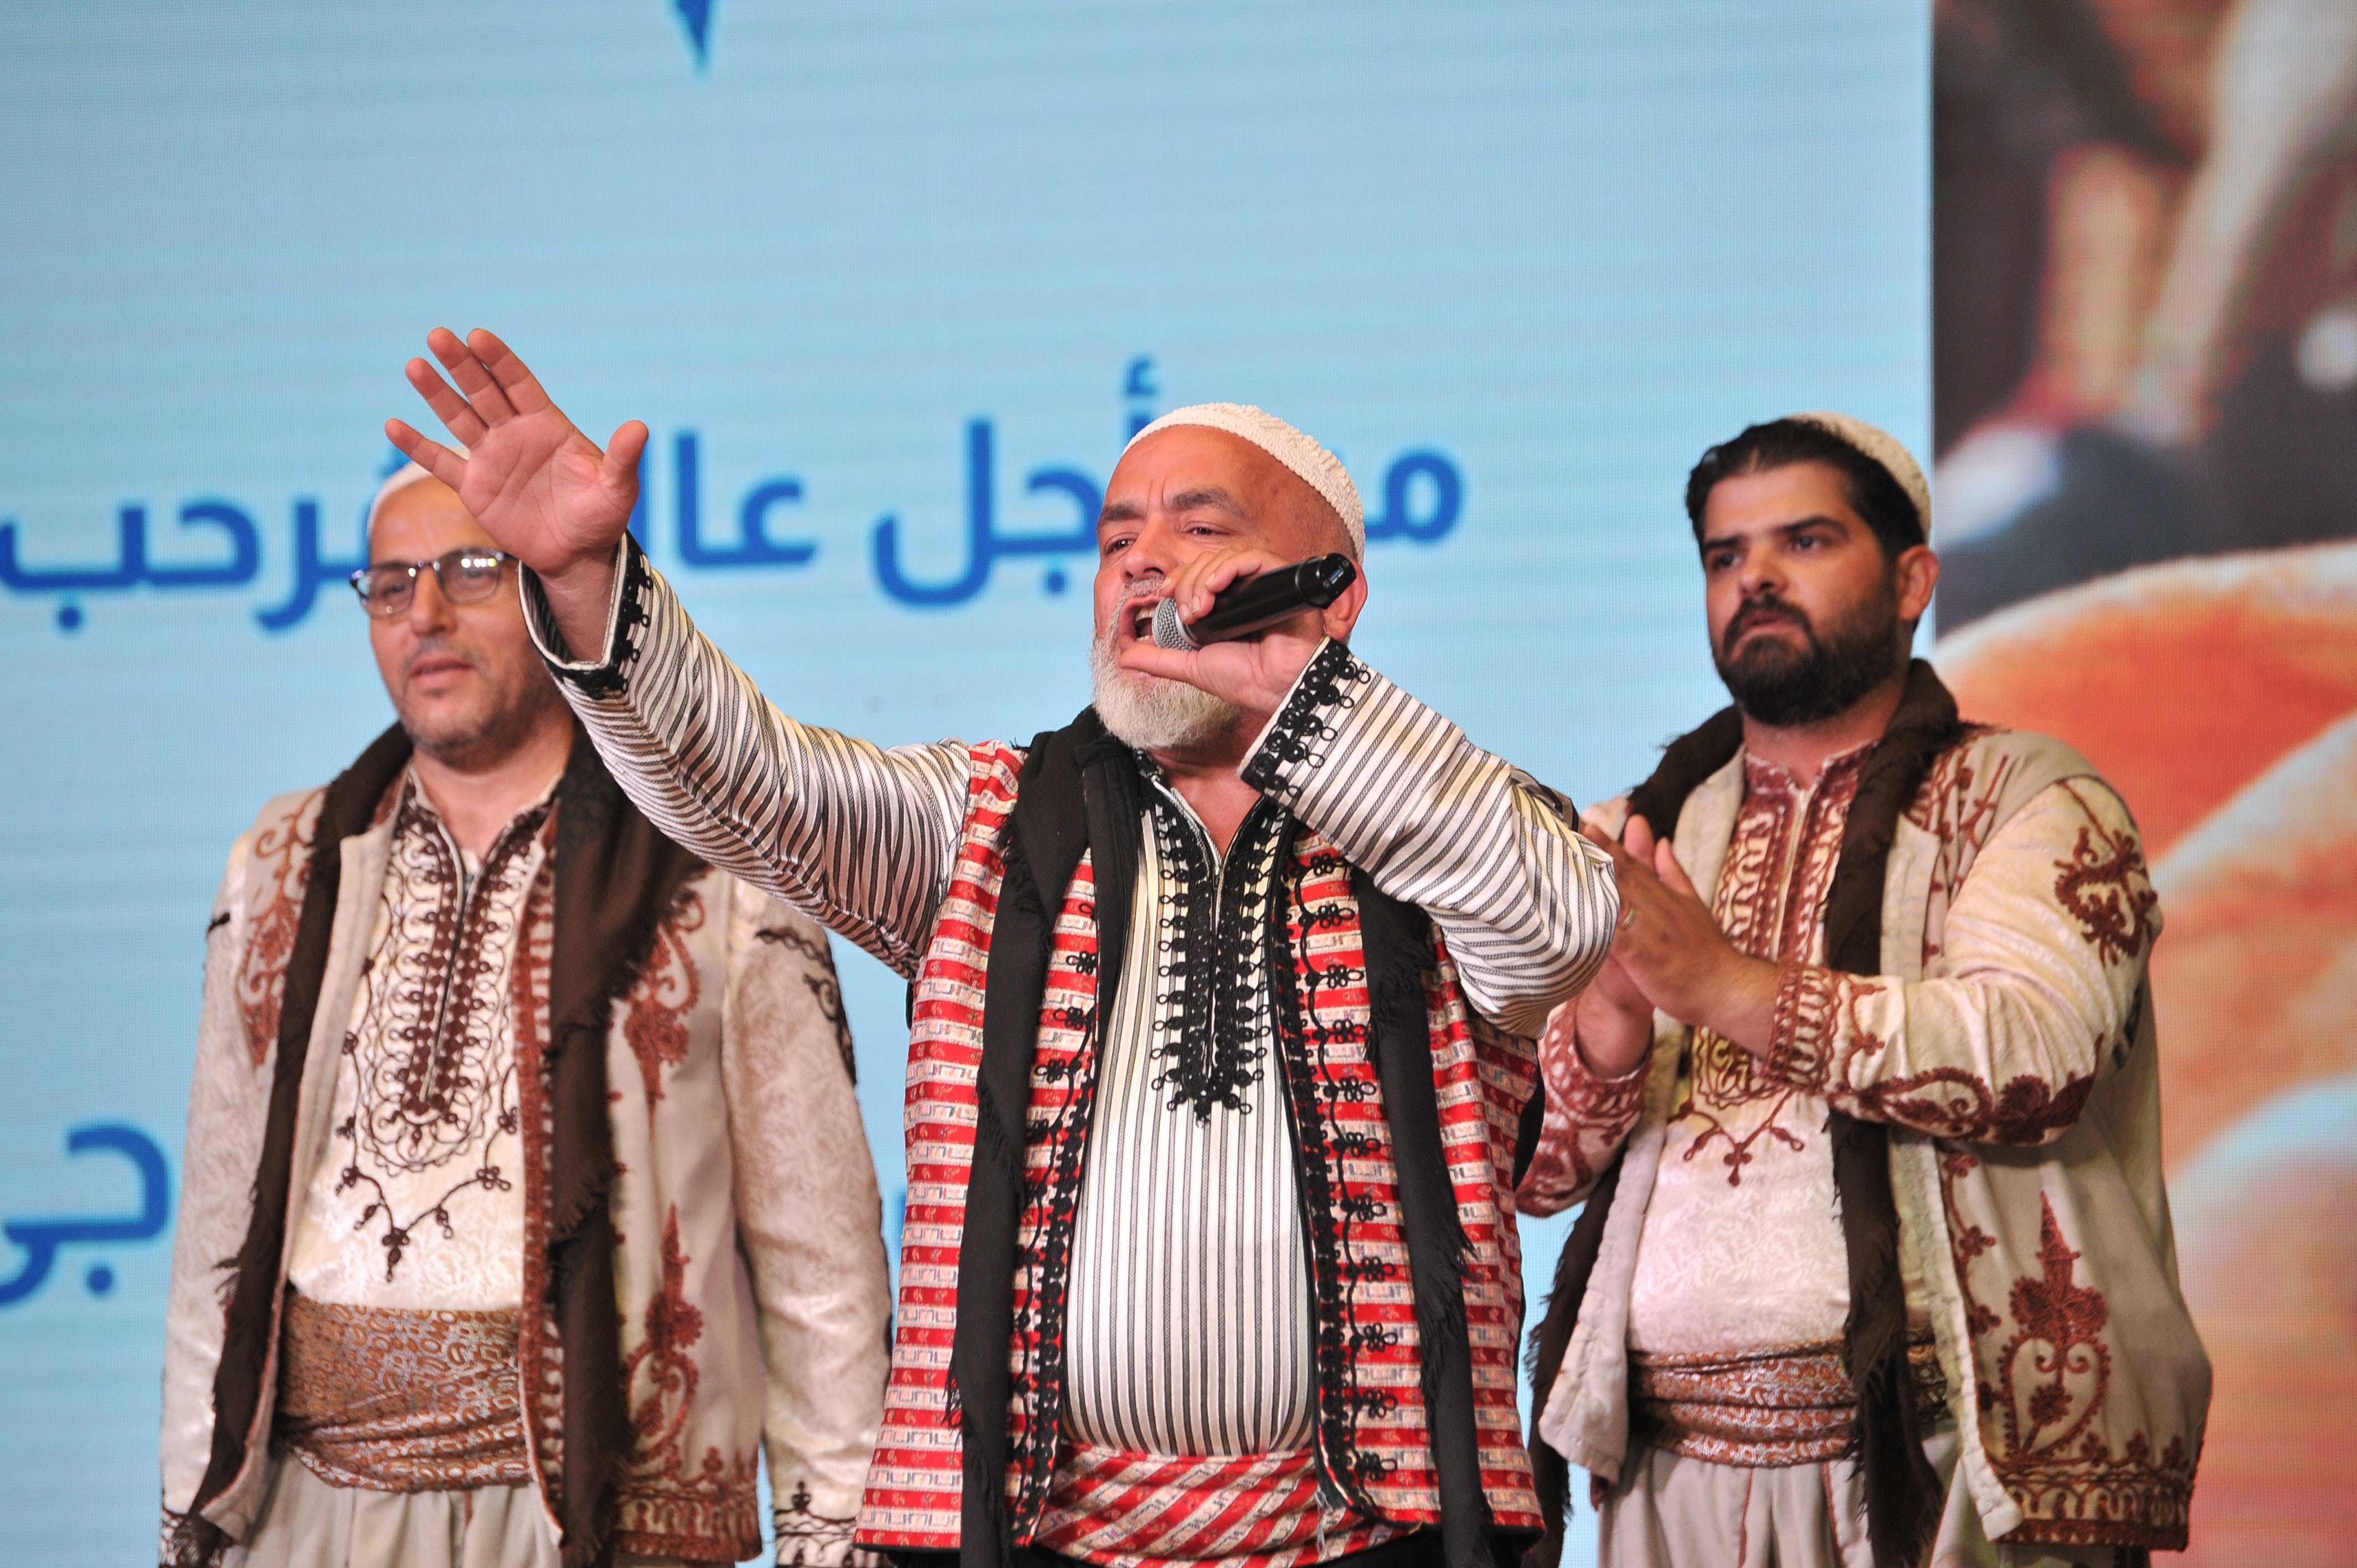 A man wearing traditional costume sings into a microphone and raises a hand to the audience while two other performers stand either side of him